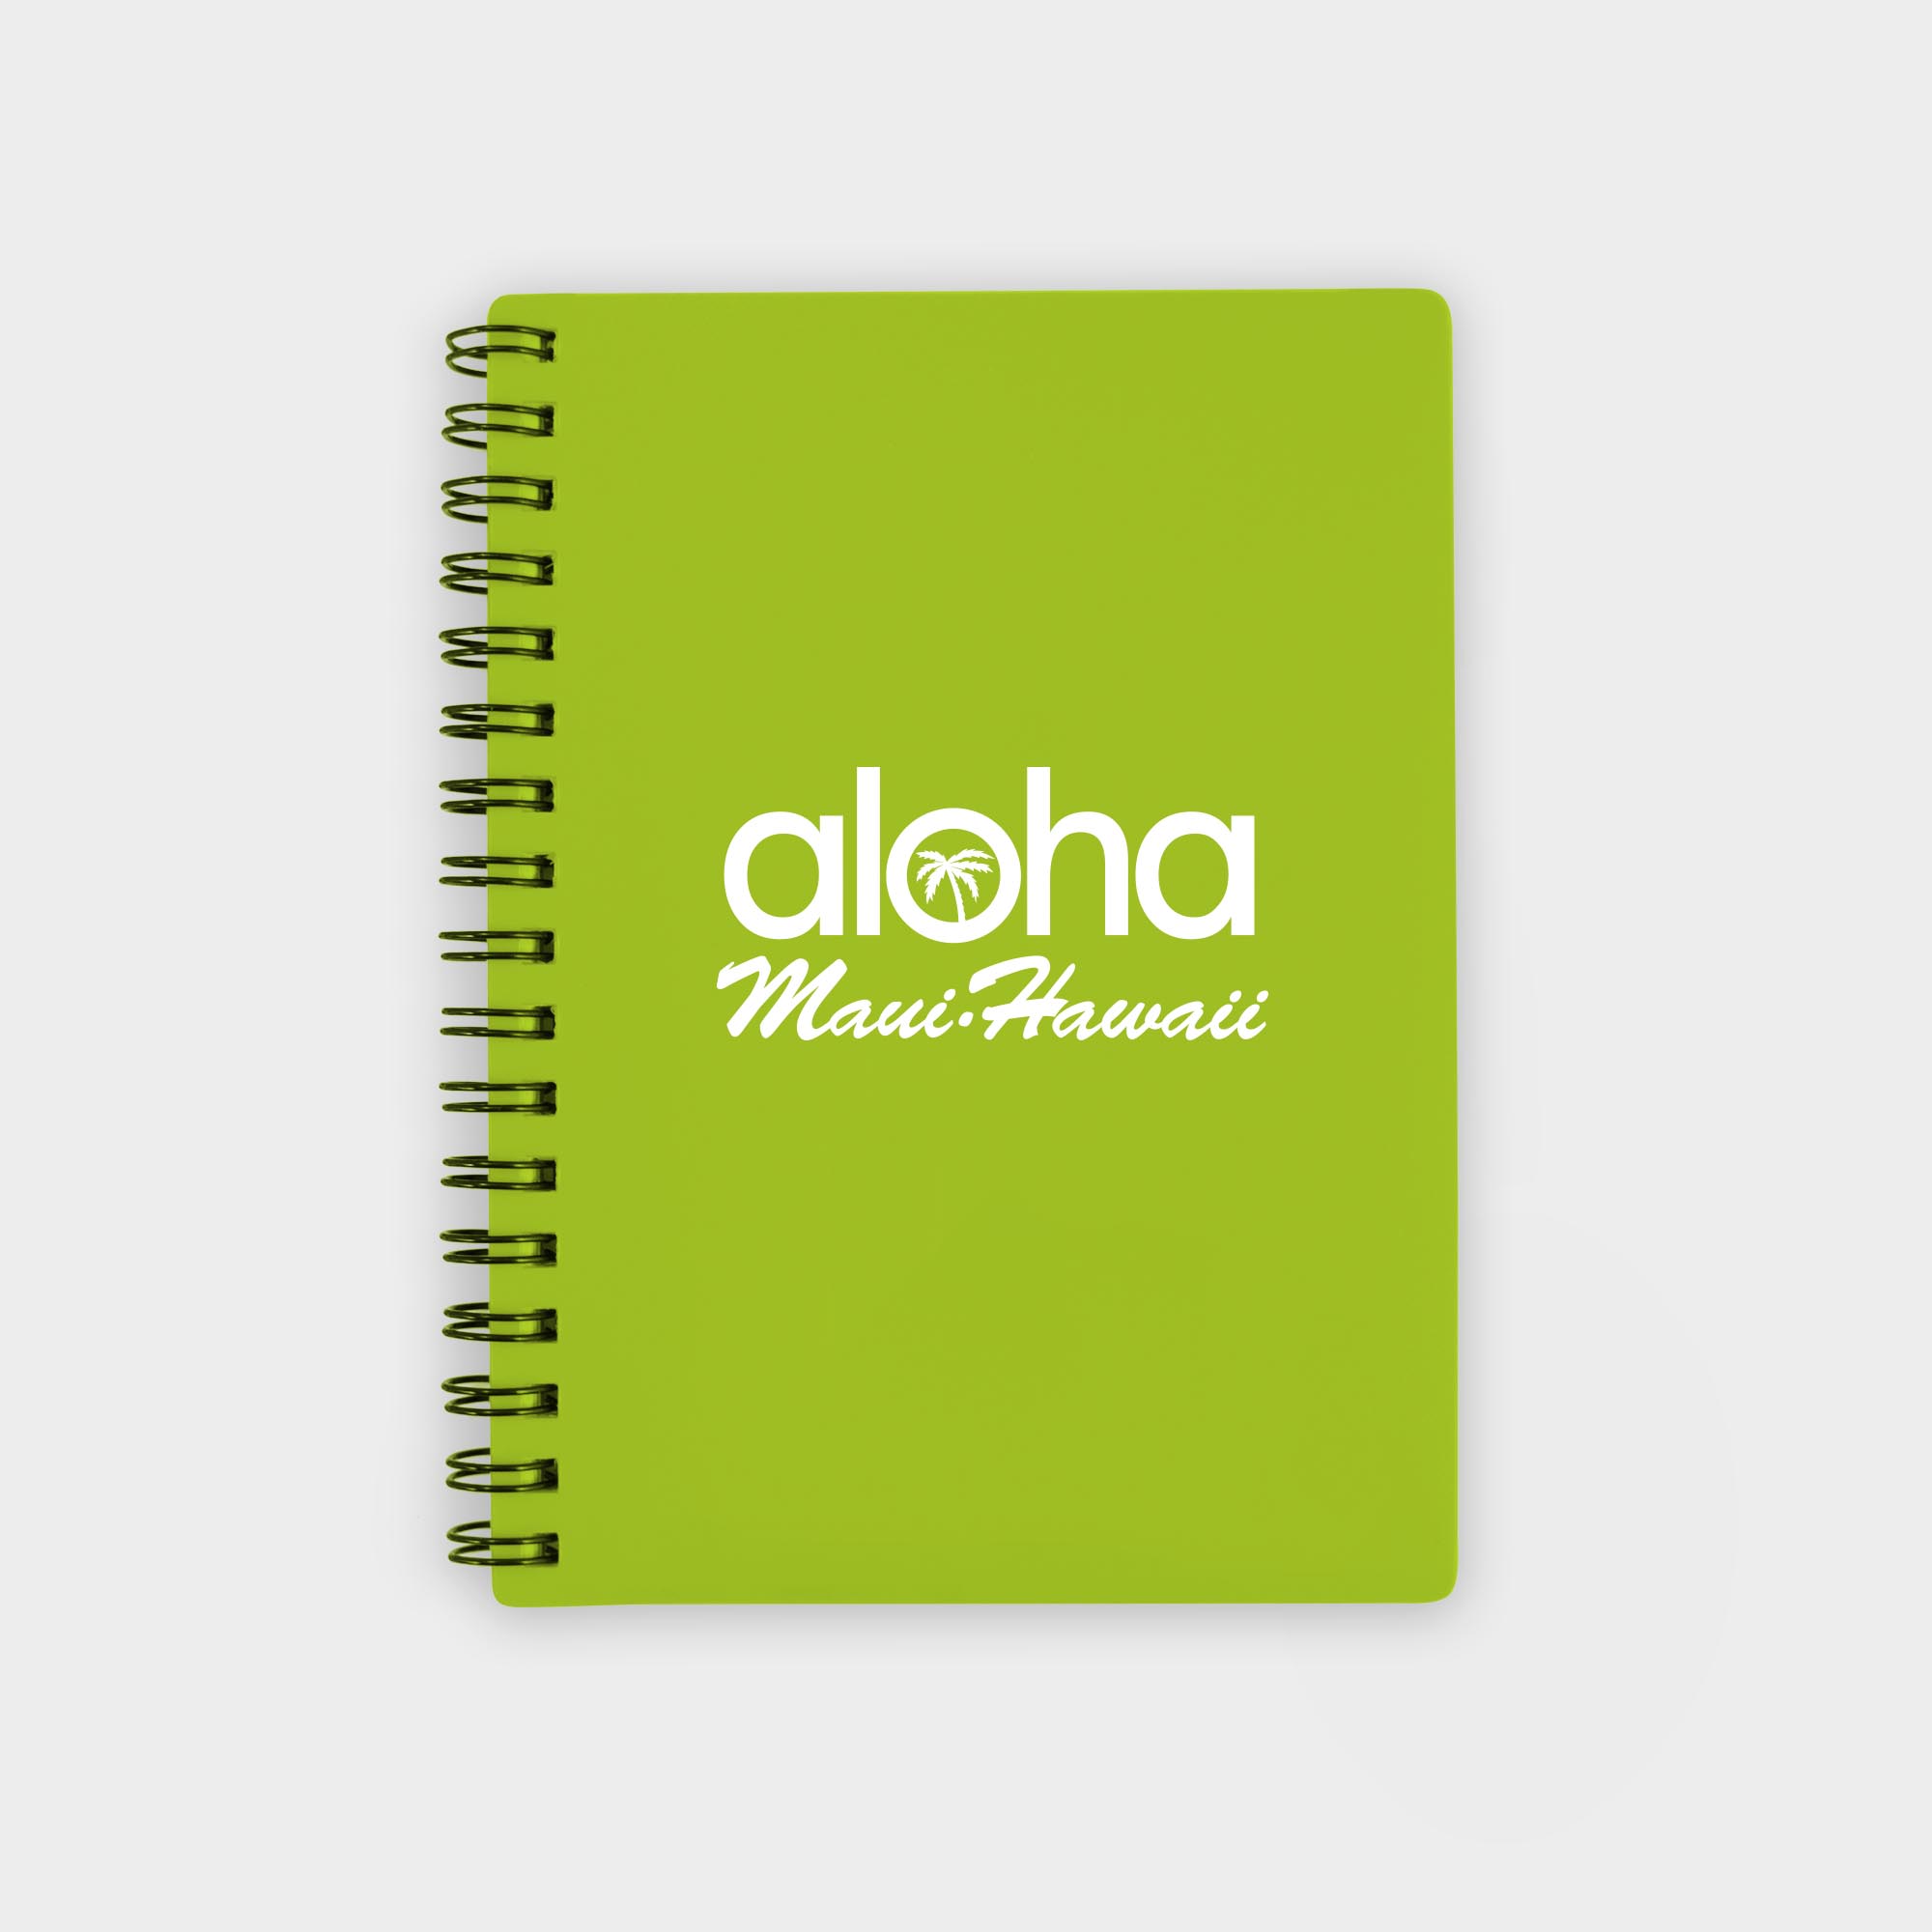 The Green & Good Polypropylene Notebook comes with recycled paper - size A6. The front and back cover is made from recycled polypropylene (500 microns), the sheets are 80gsm. Comes wirebound with 50 sheets as standard. Please contact us if you require a bespoke number of sheets. Light Green